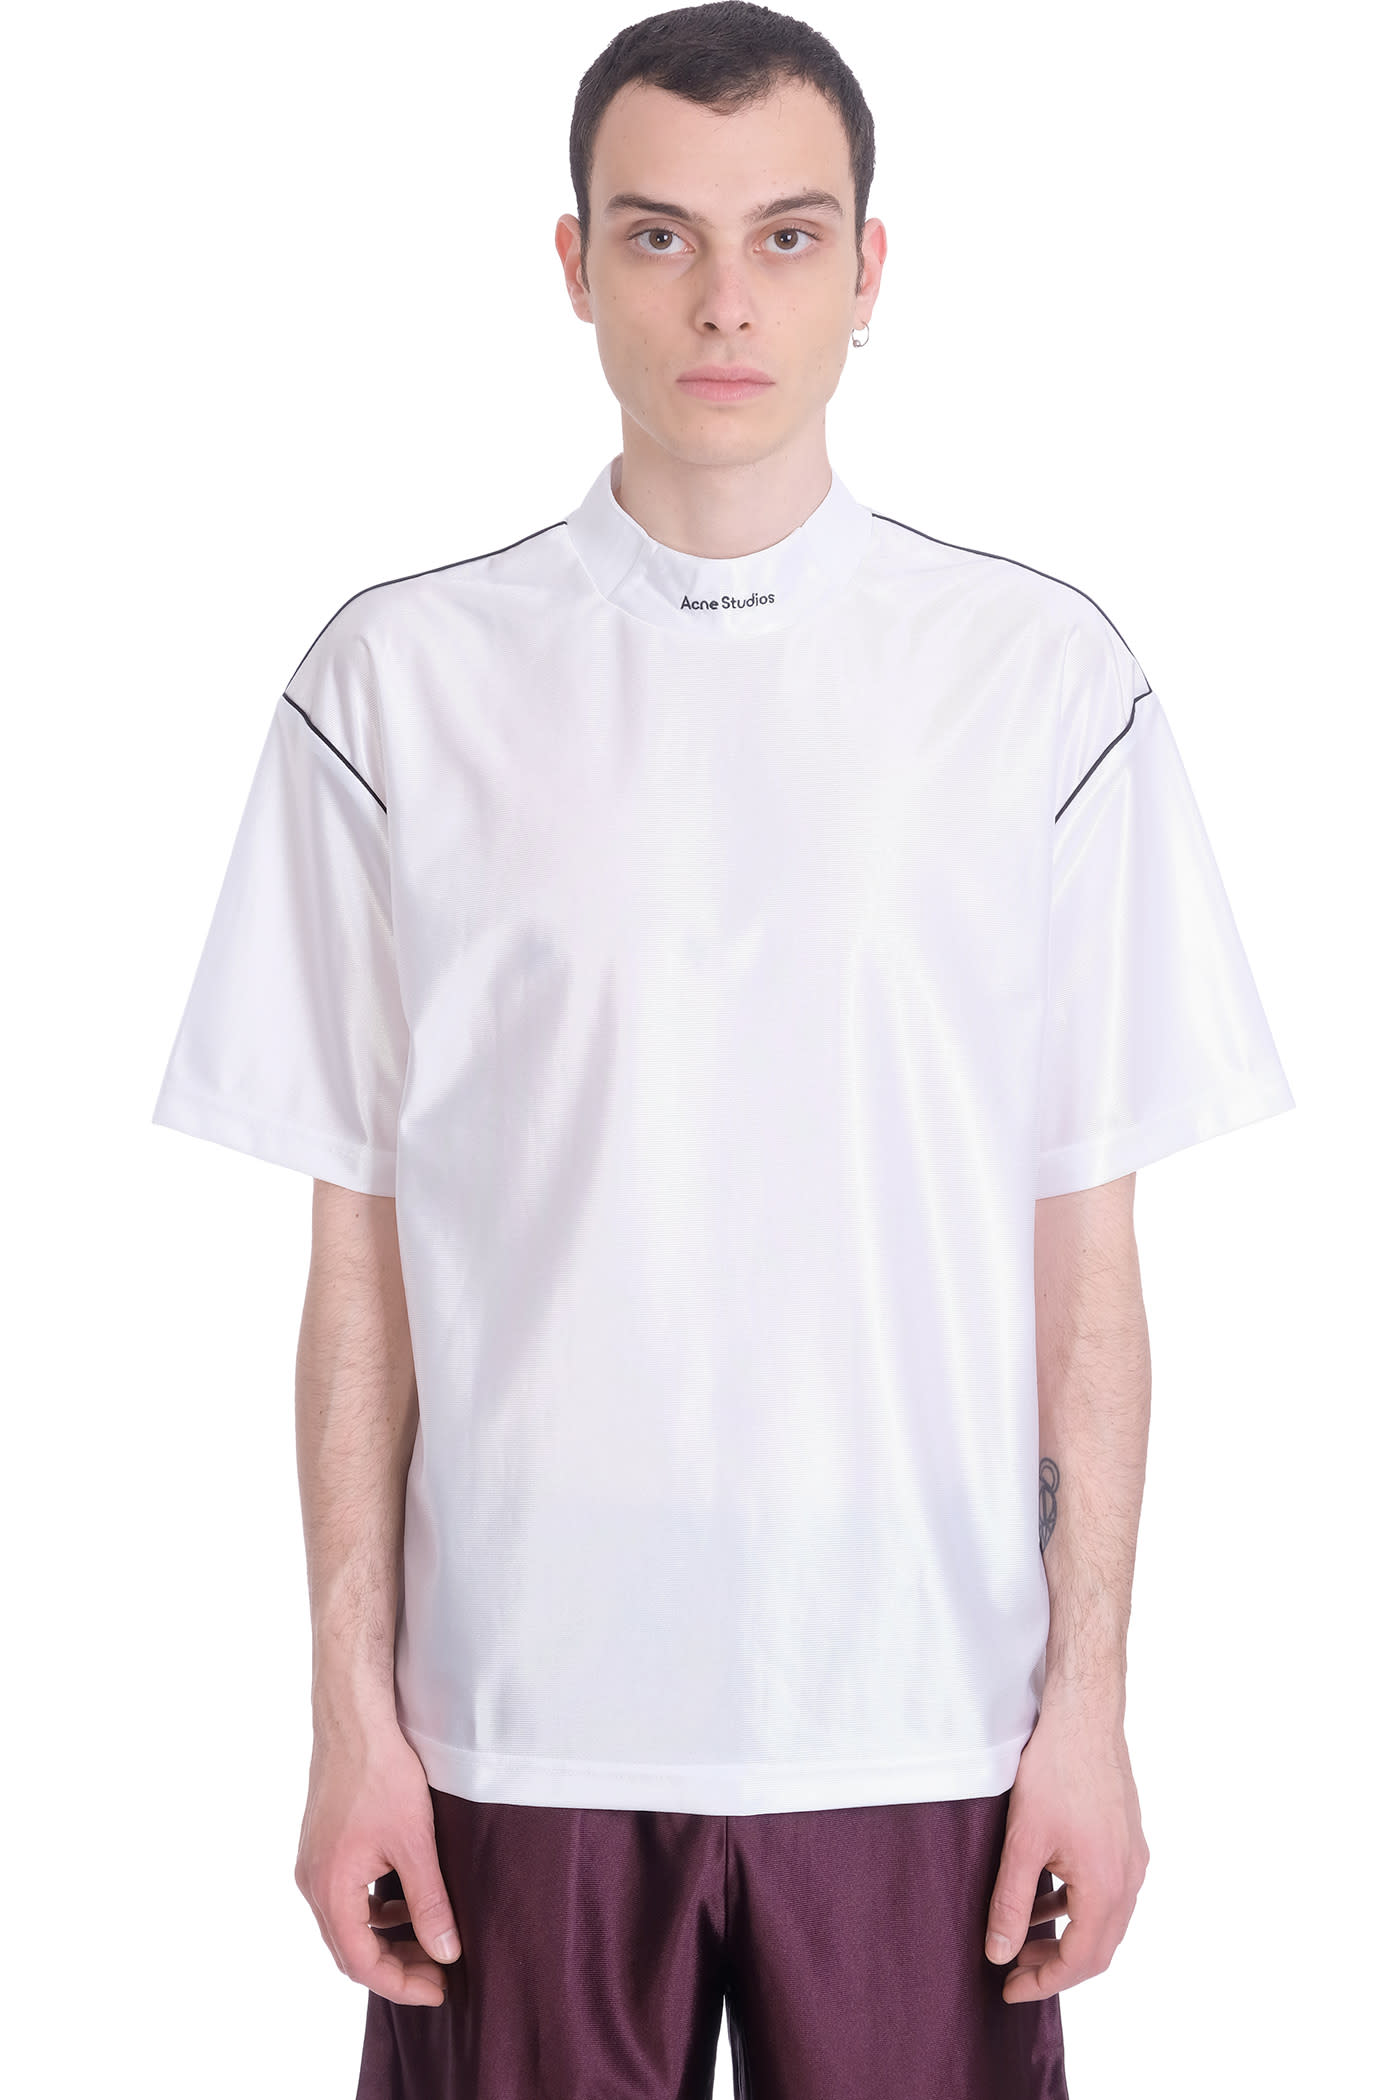 Acne Studios Exco Piping T-shirt In White Polyester